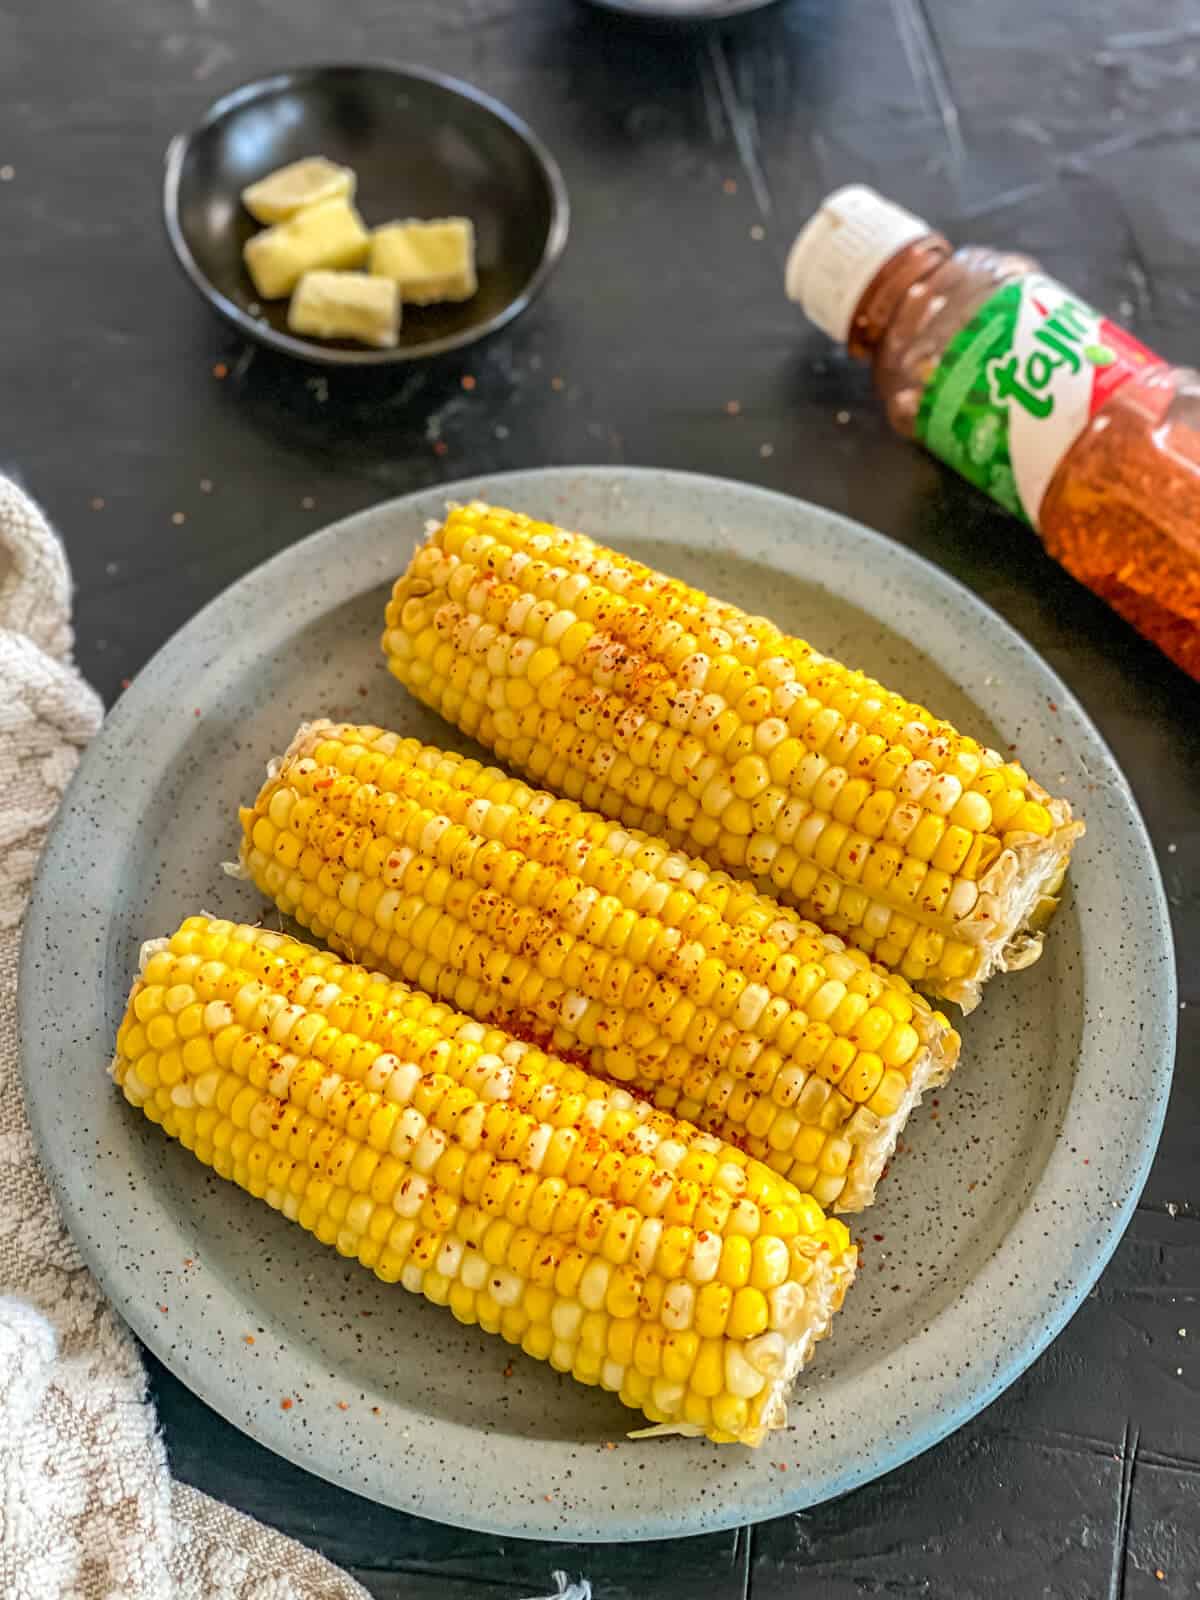 Three cobs of corn, cooked and laying on a plate. Sprinkled with seasoning.